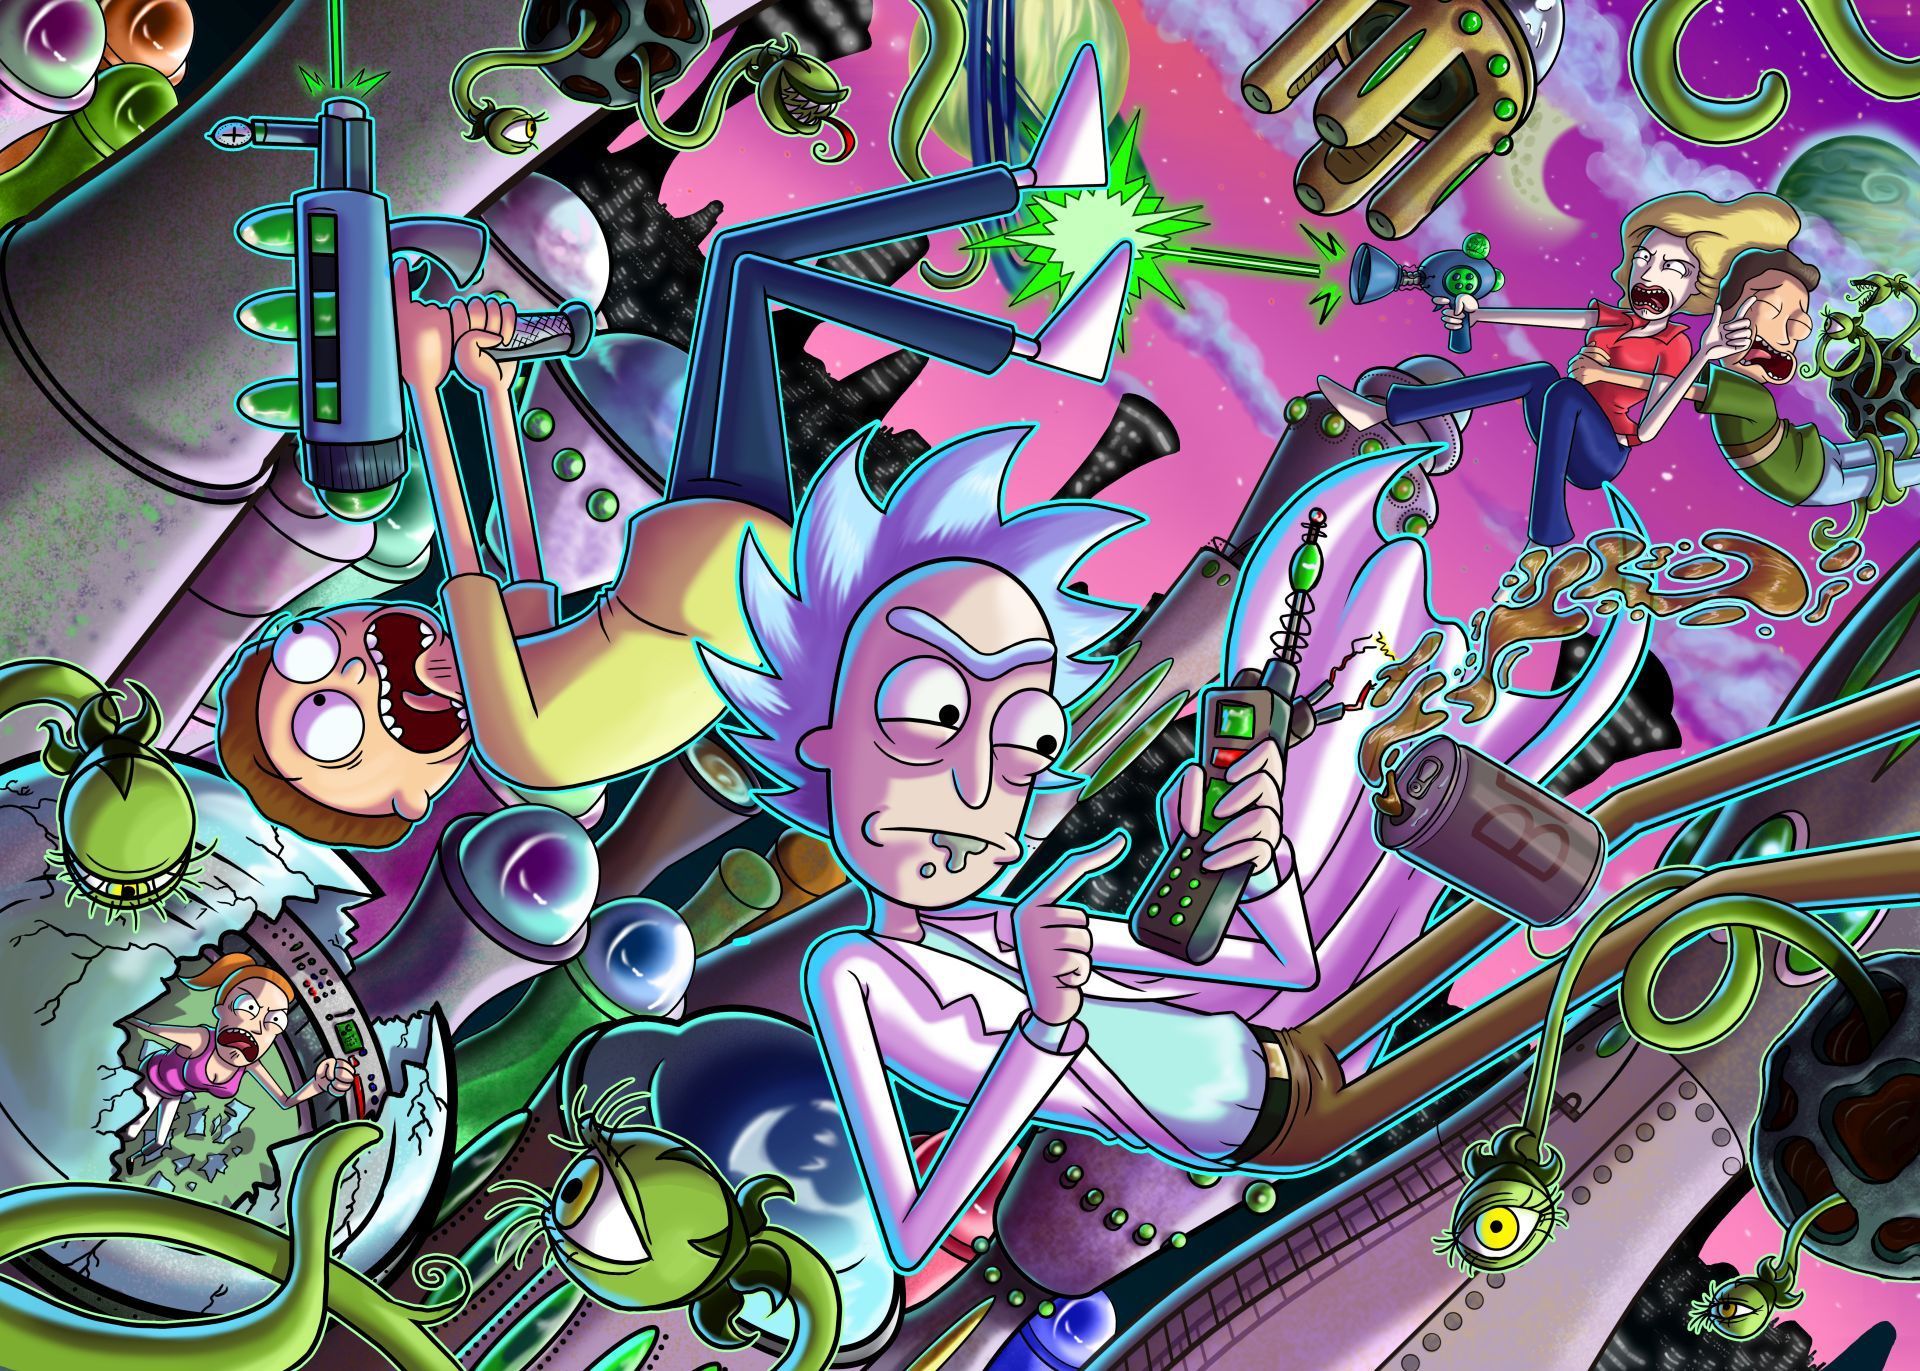 Wallpaper of the Day & Morty. Word of The Nerd